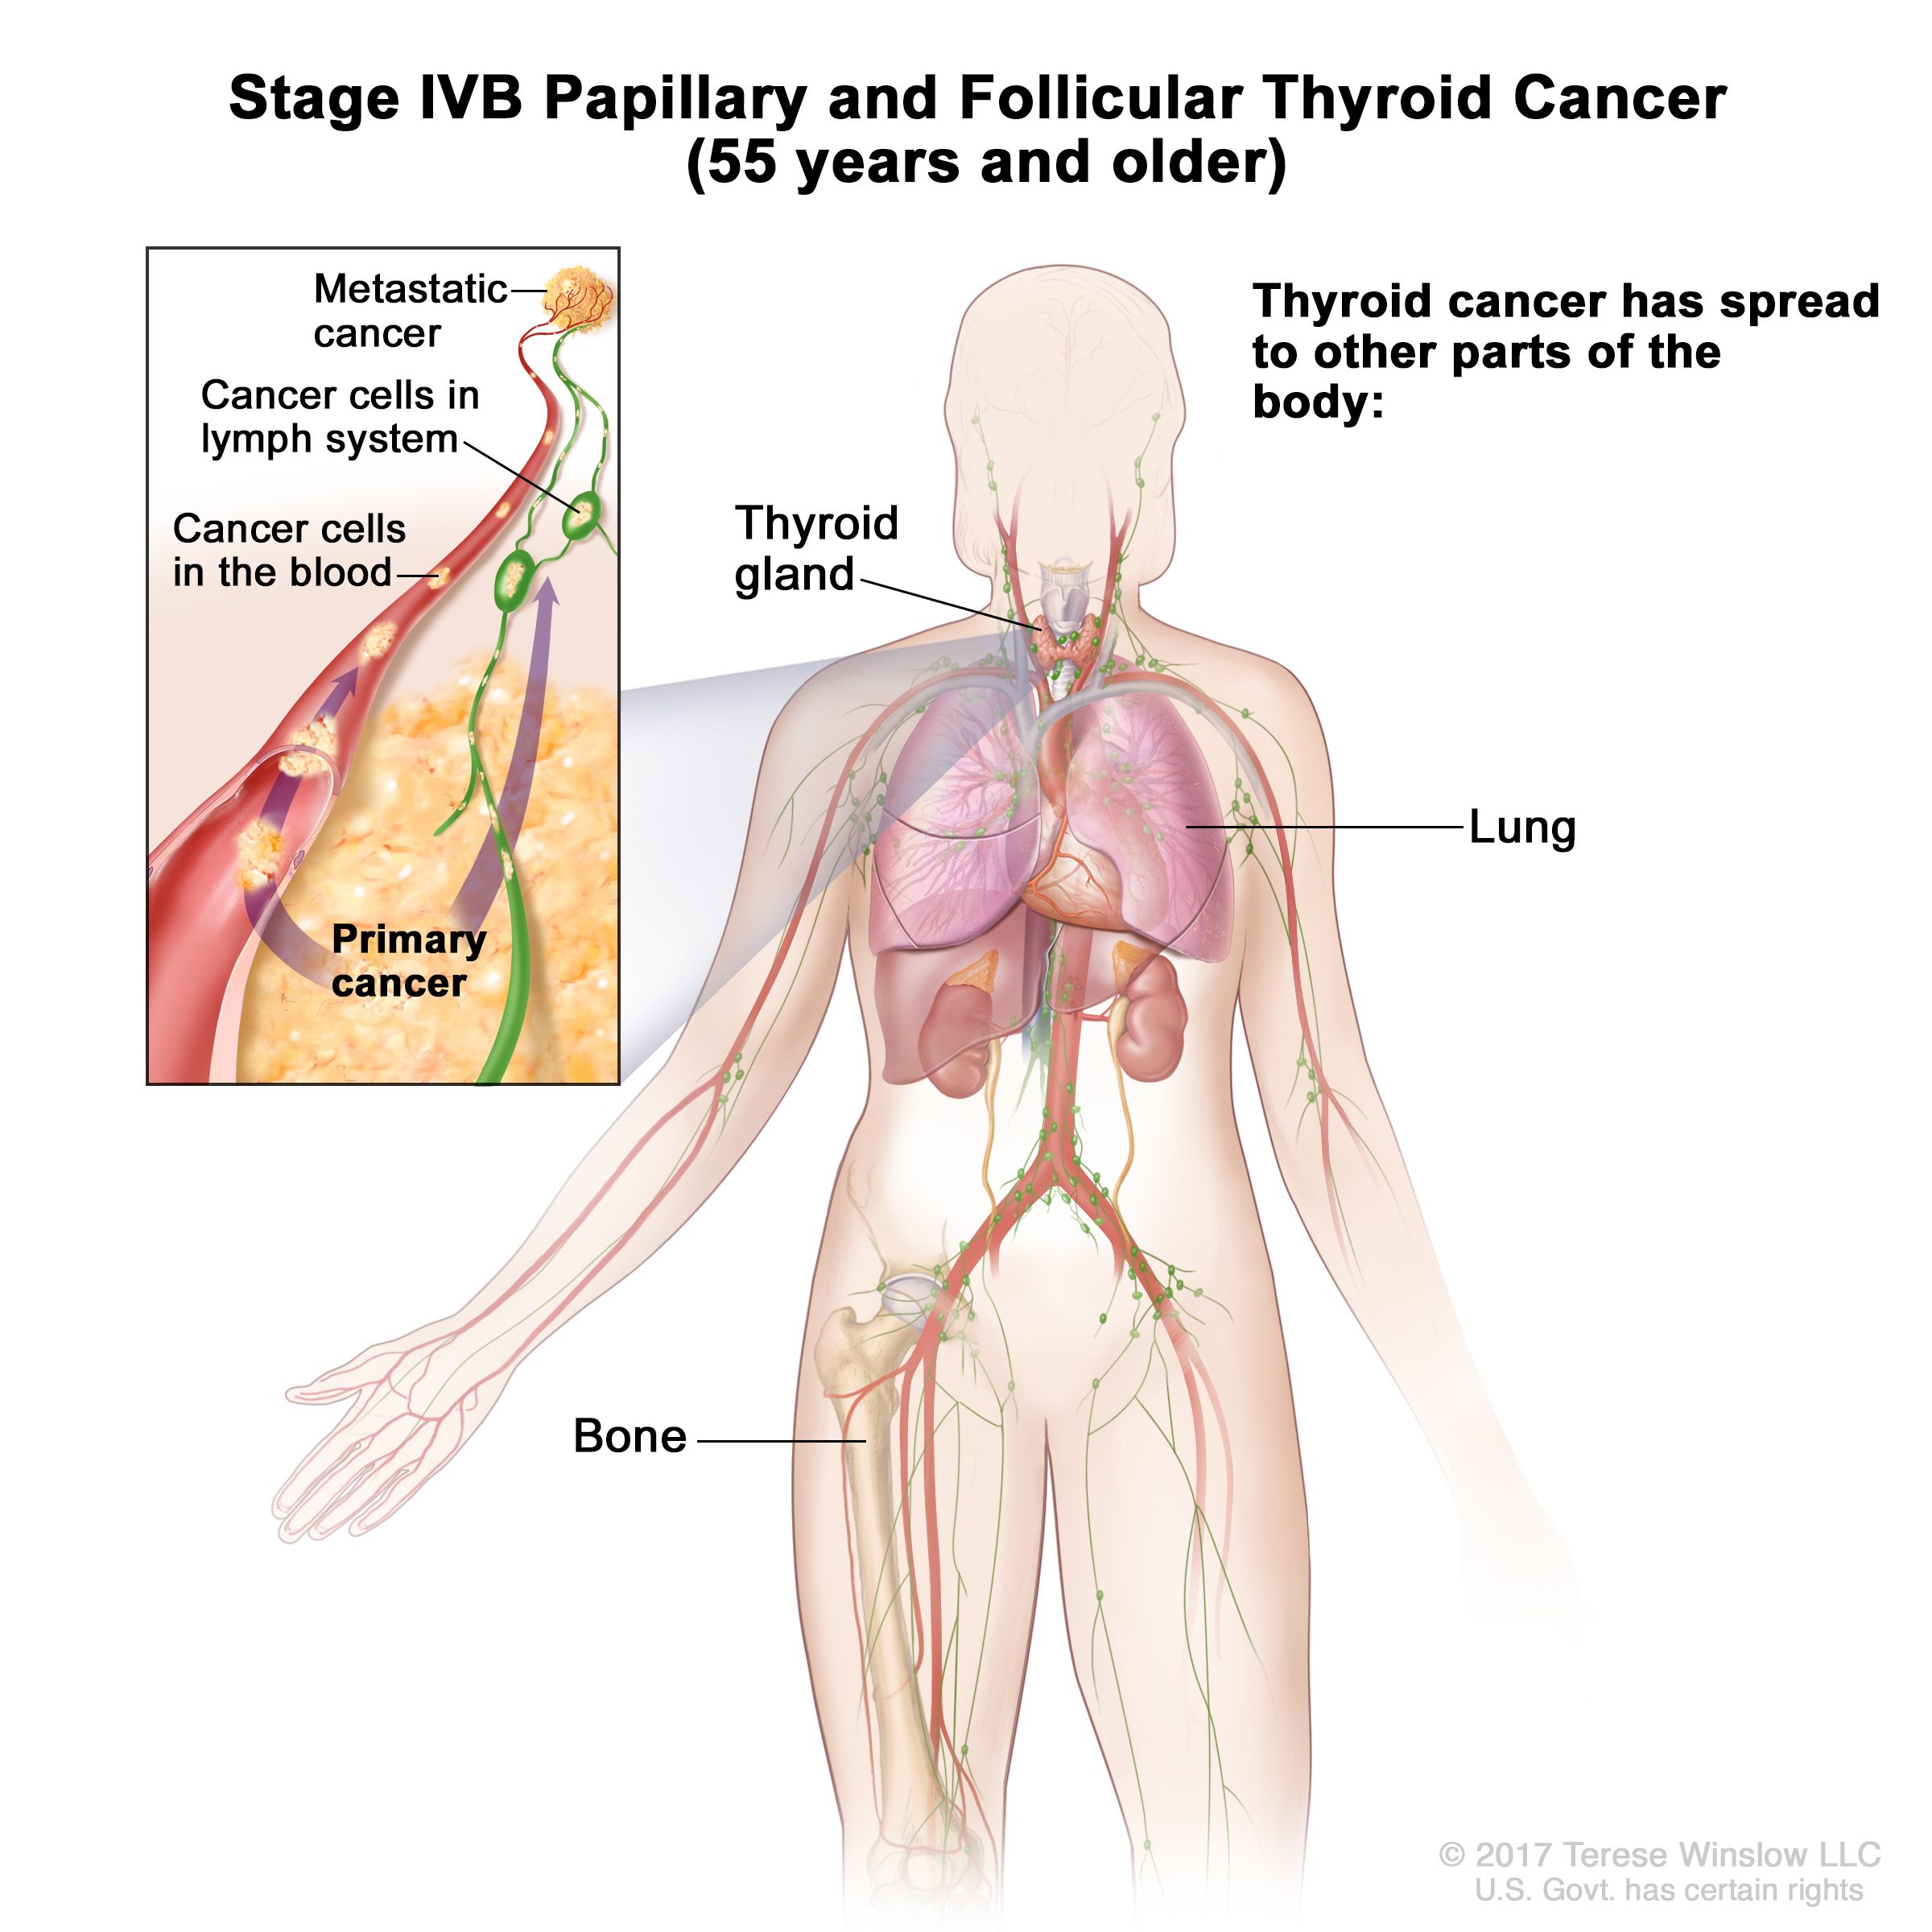 How Often Does Papillary Thyroid Cancer Spread To Lungs